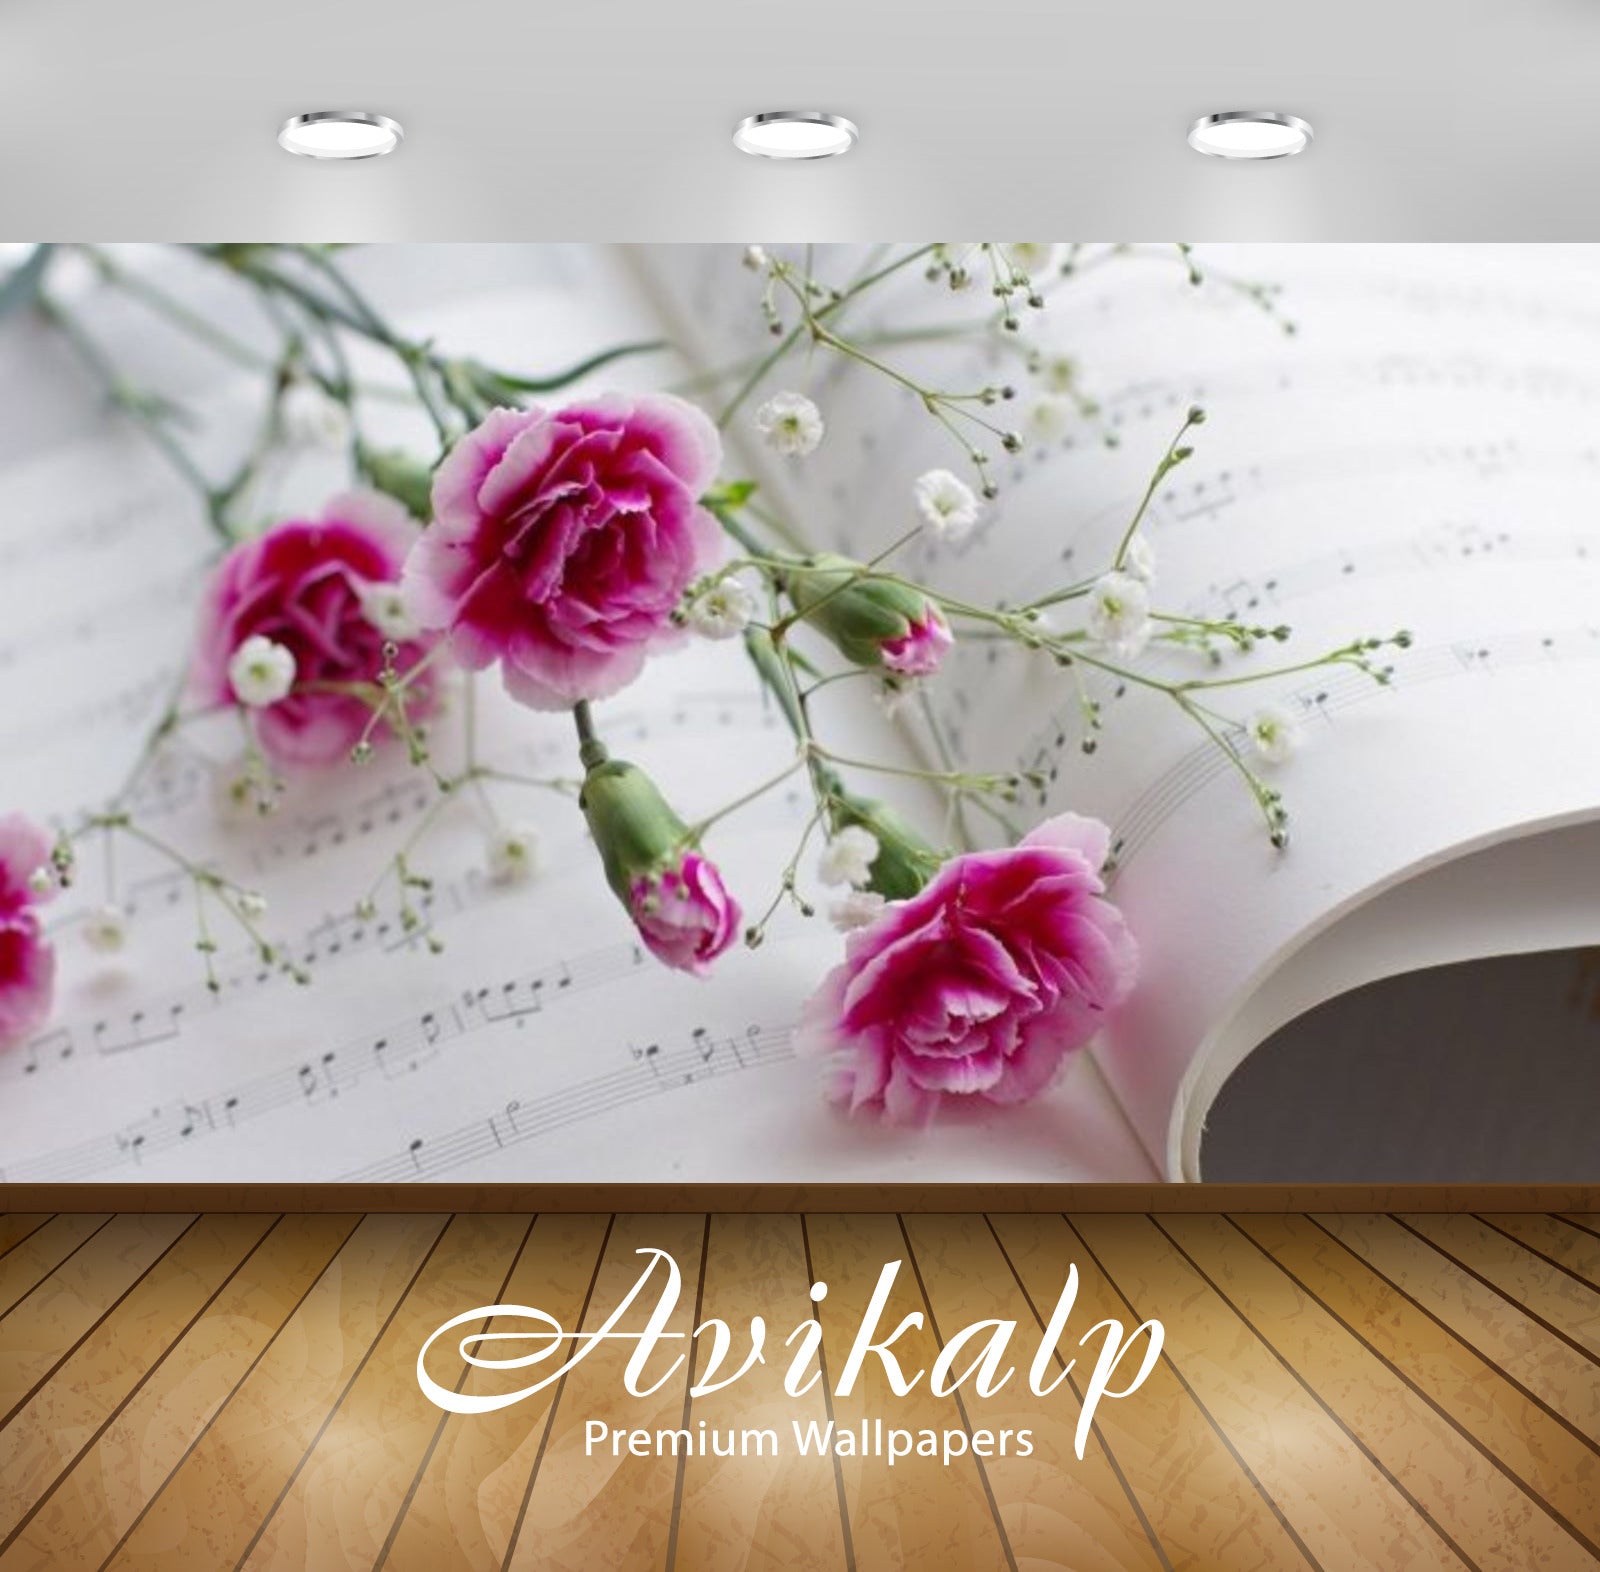 Avikalp Exclusive Awi2124 Pink Carnations Gypsophila Paniculata Sheet Music  Full HD Wallpapers for